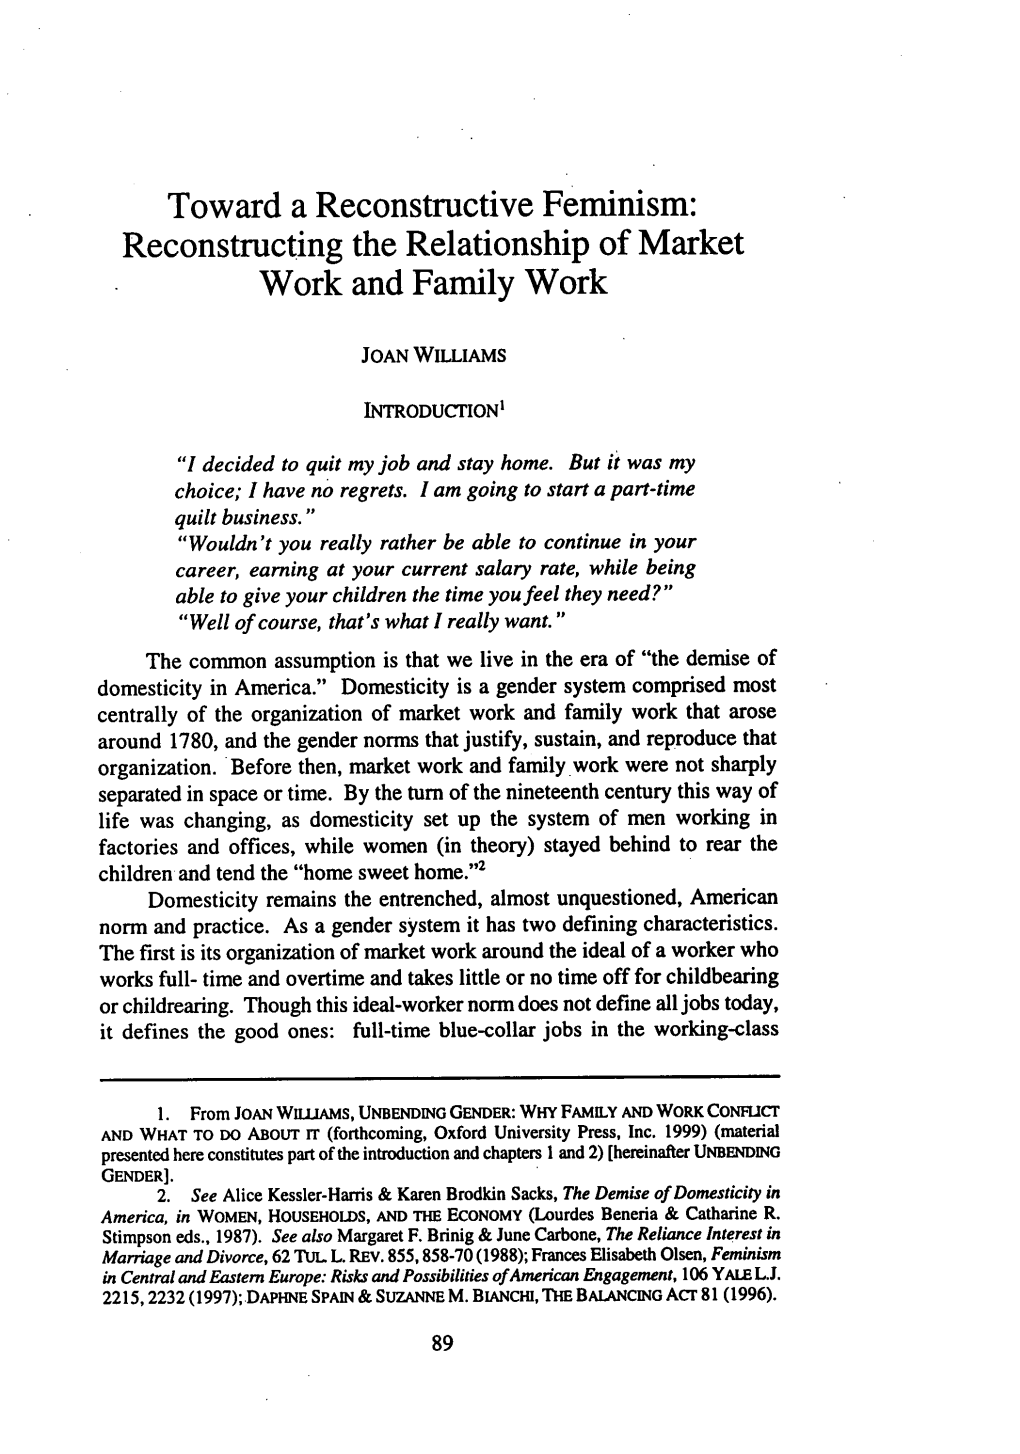 Toward a Reconstructive Feminism: Reconstructing the Relationship of Market Work and Family Work